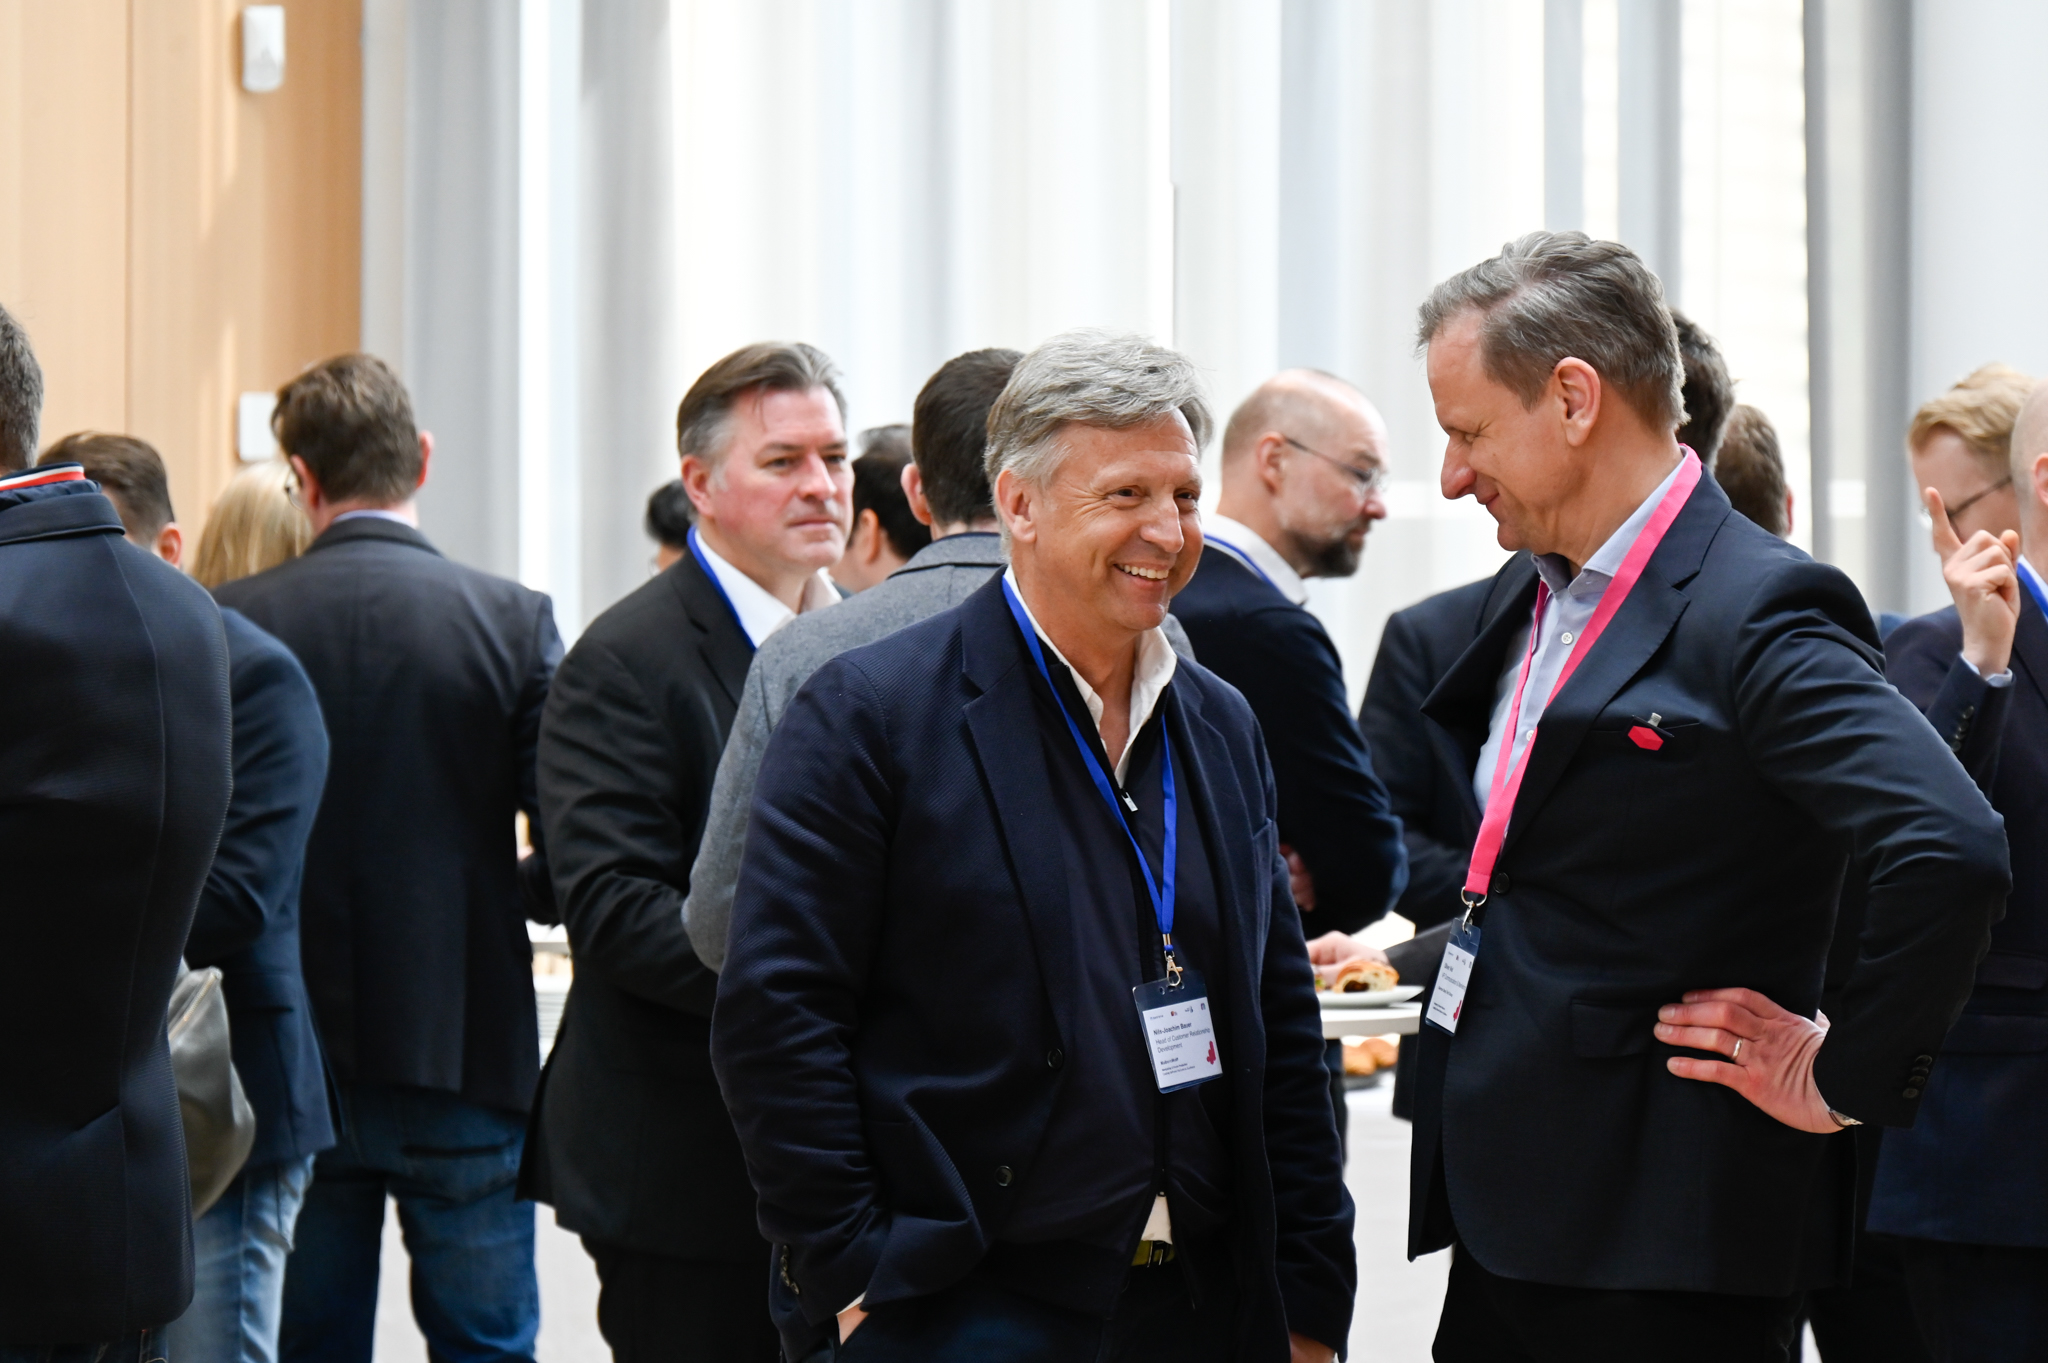 Oliver Viel and Nils-Joachim Bauer Exchanging Thoughts at the HPI with Oliver Laitenberger in the Background